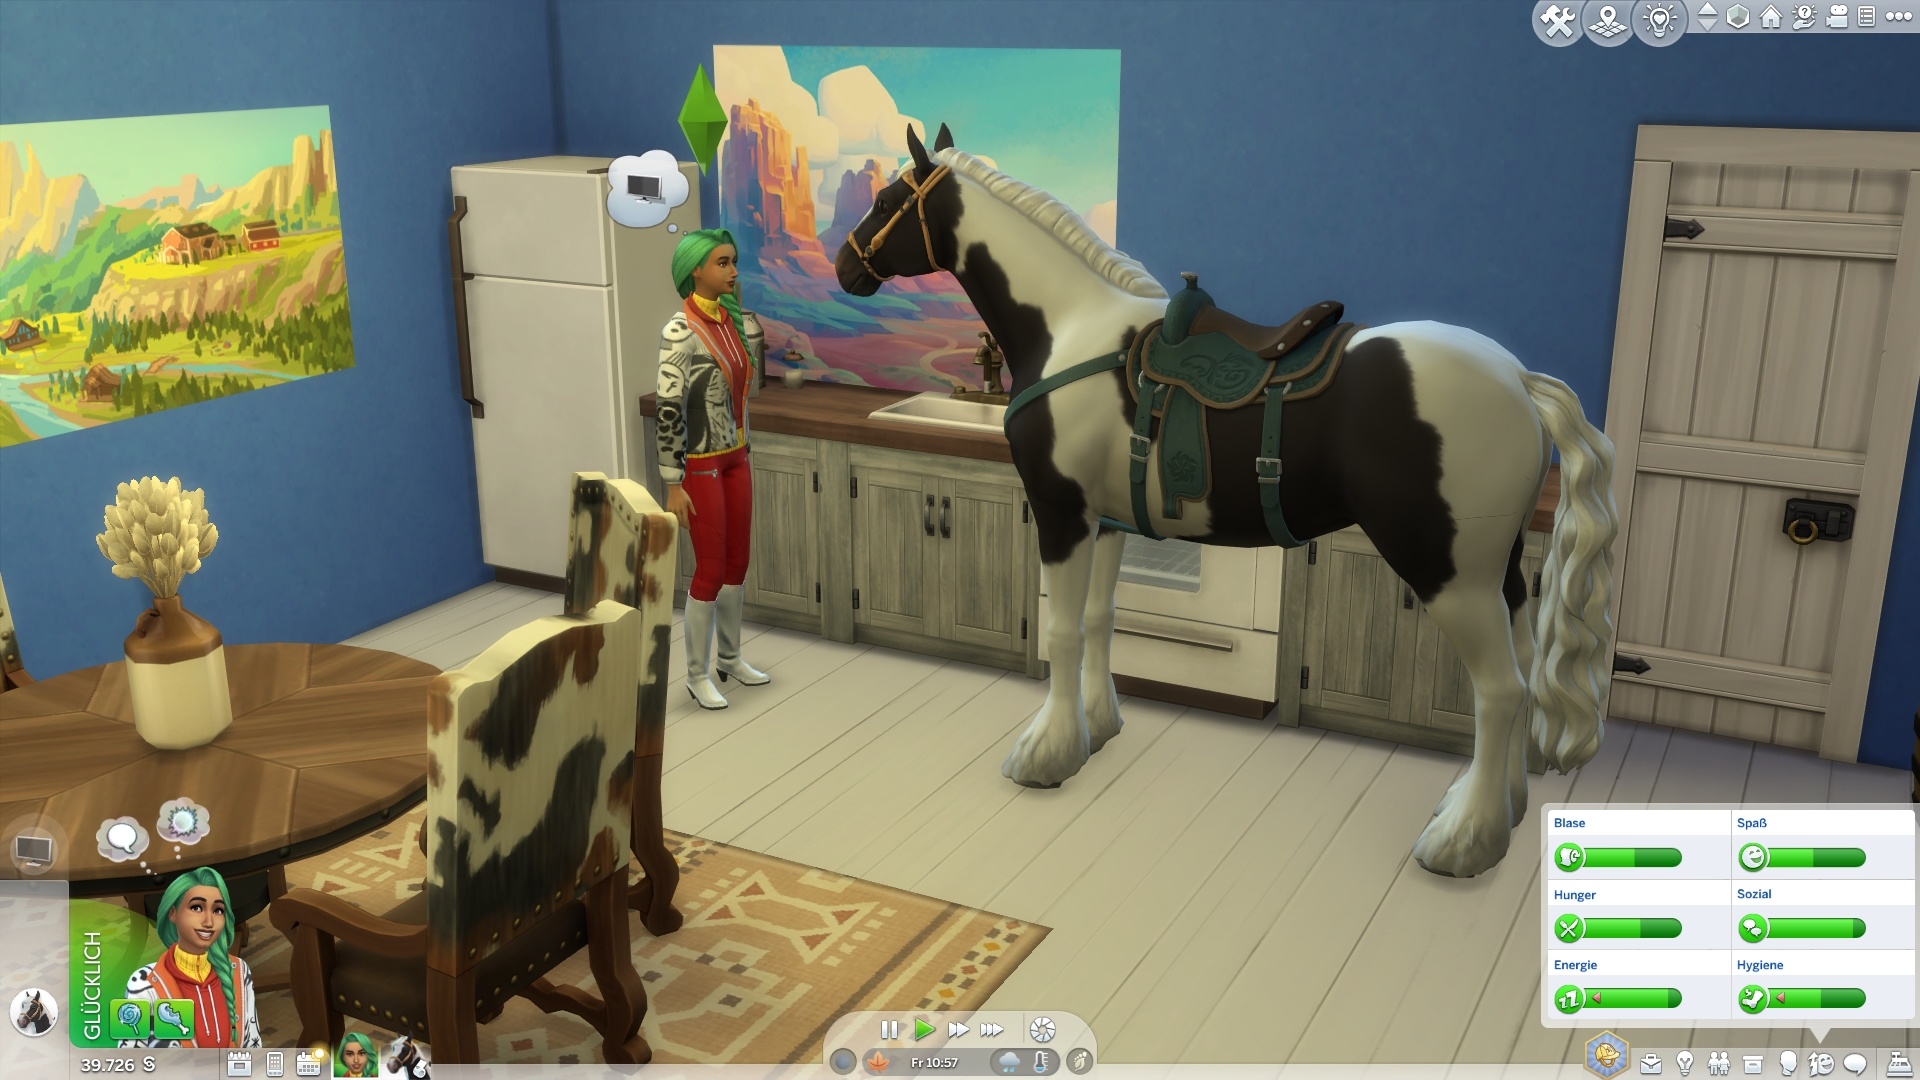 (There is a horse in the corridor ... if you don't lock the doors for horses in a ground level house.)